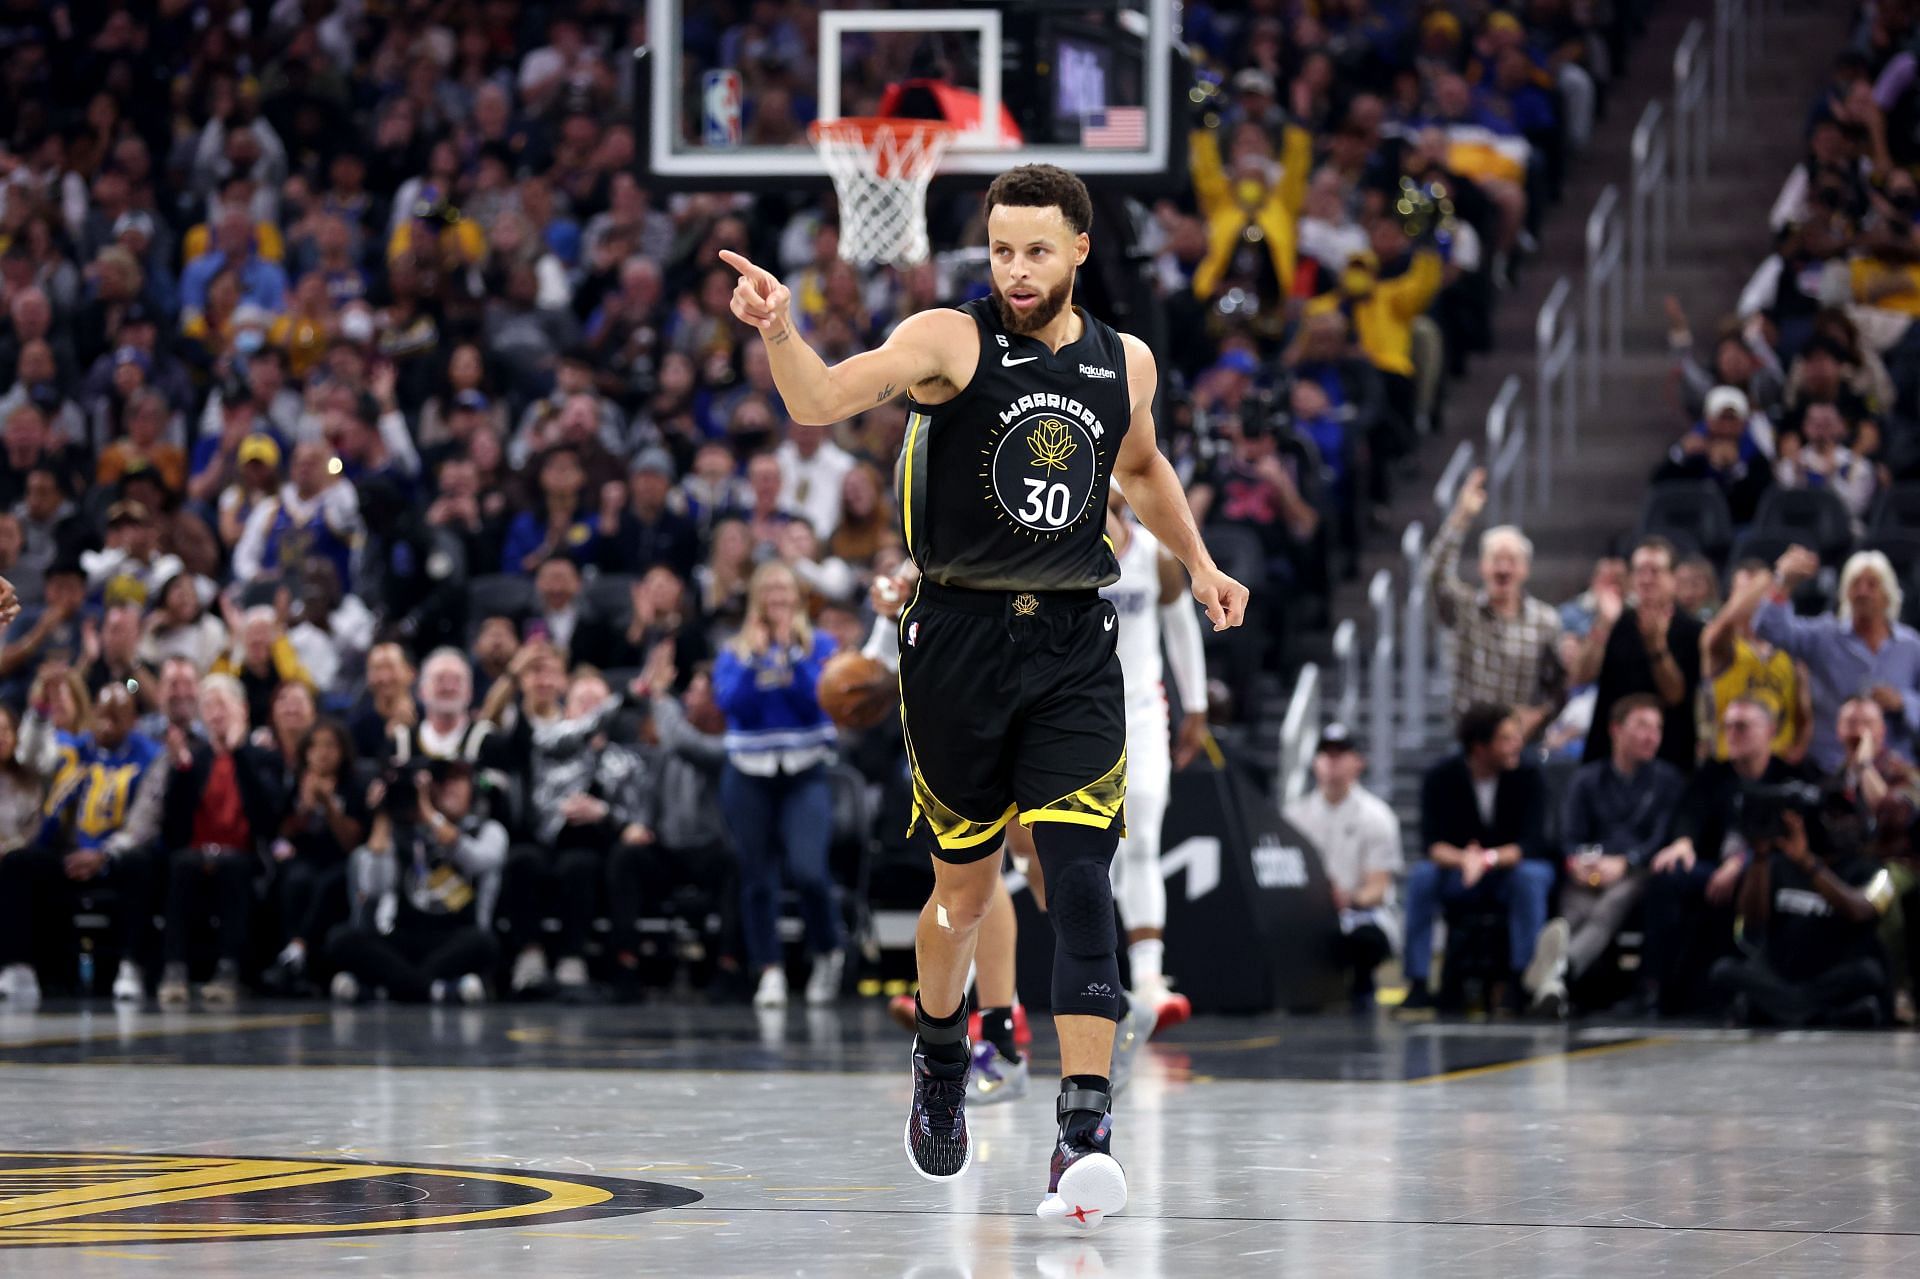 Where does Steph Curry's jersey rank in all-time jersey sales?